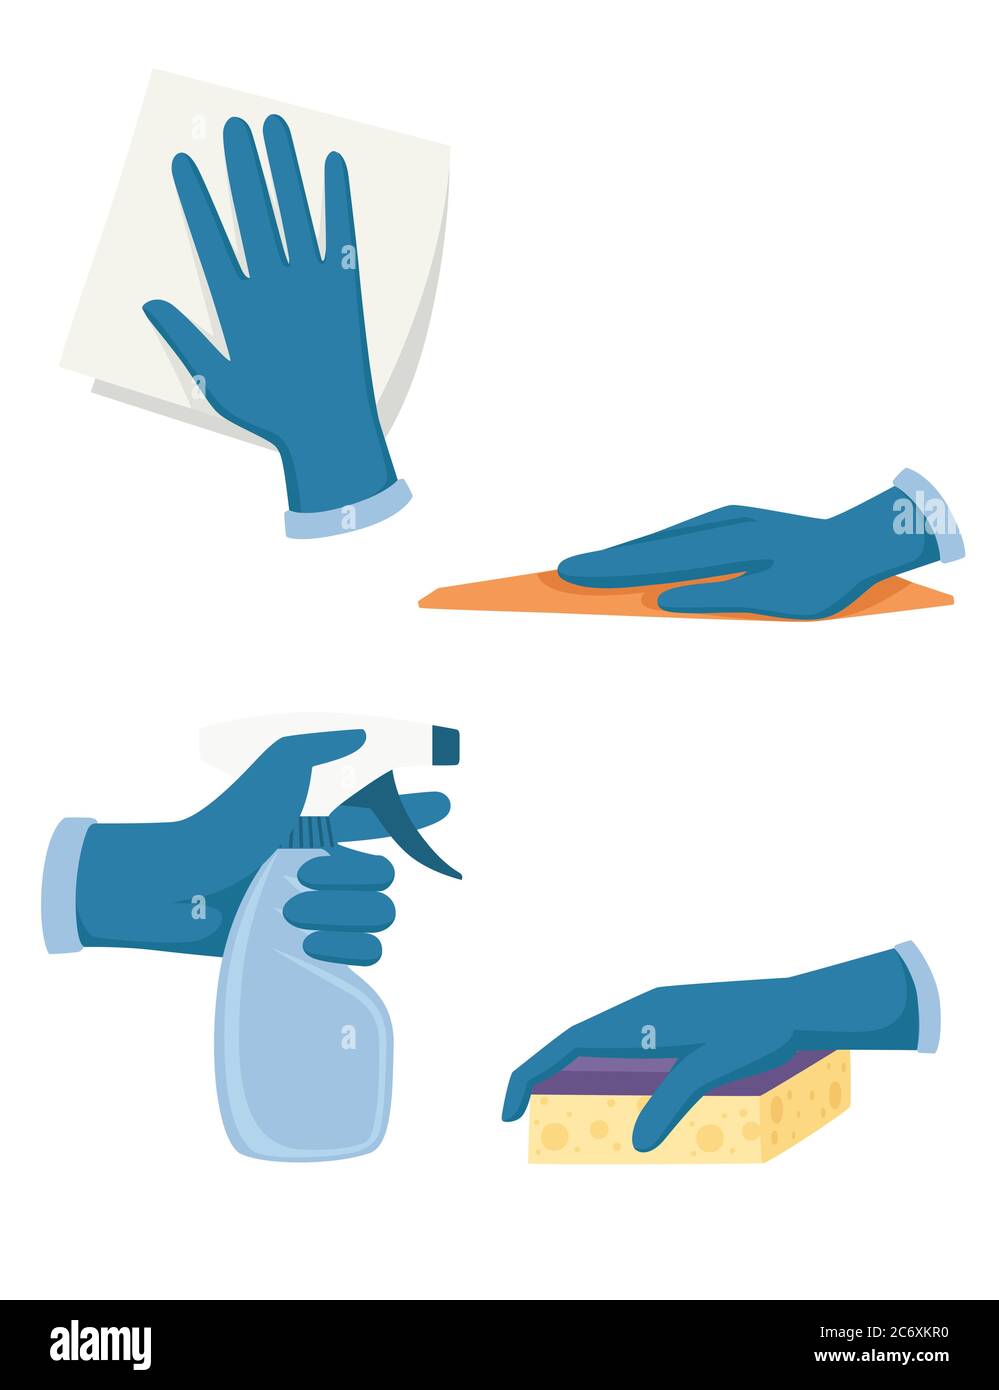 How to use Glove in a bottle 